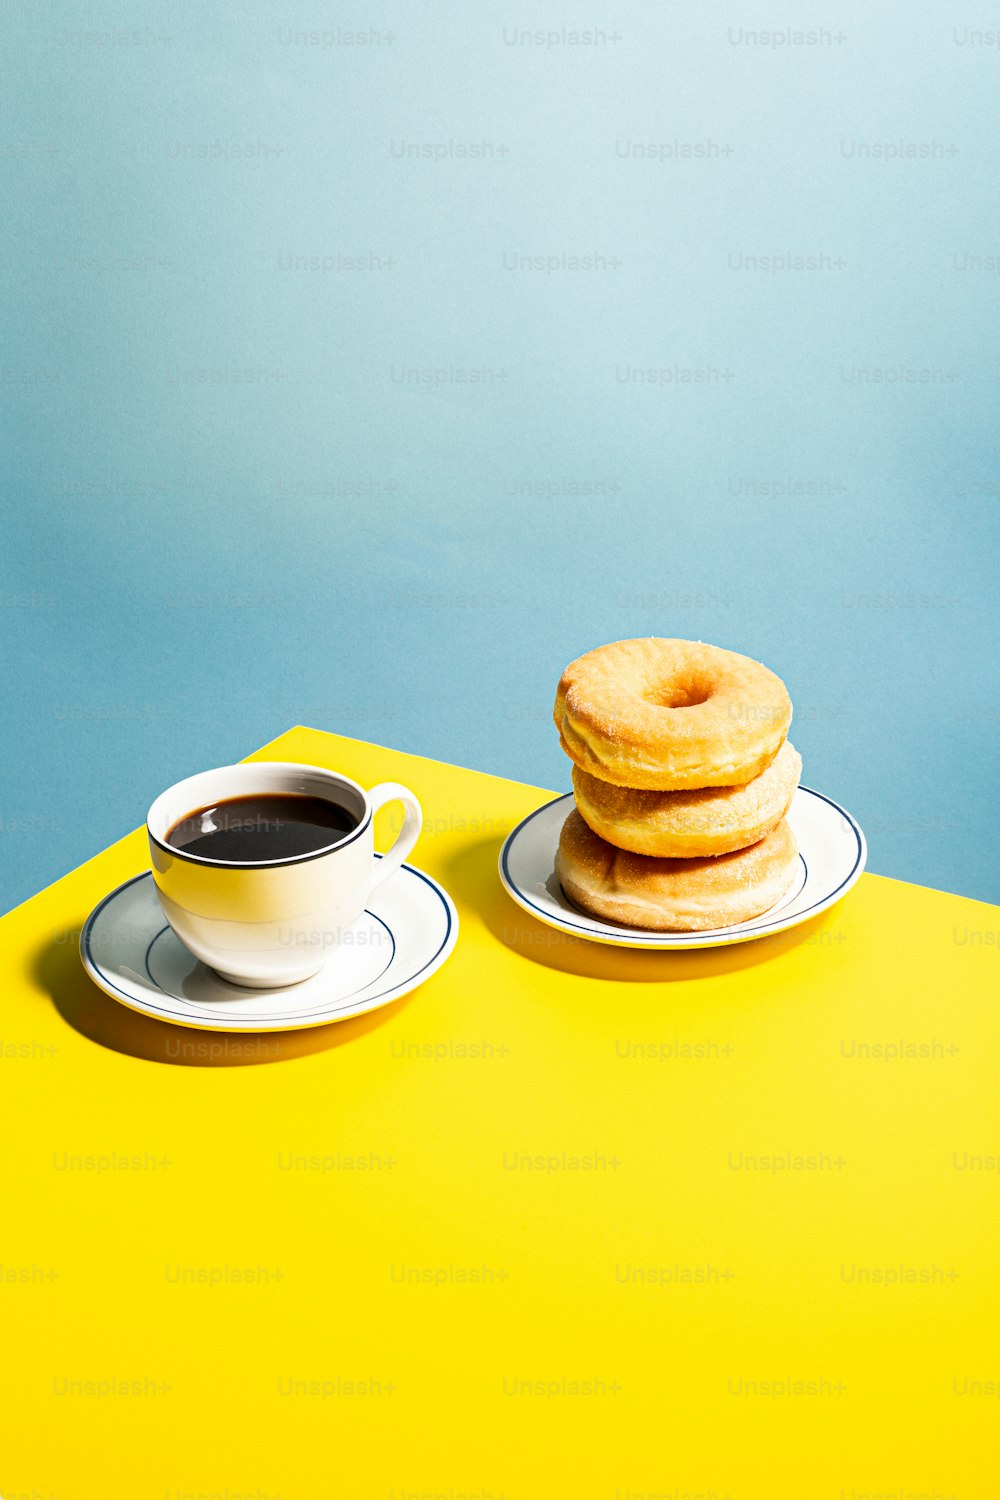 a stack of donuts sitting next to a cup of coffee